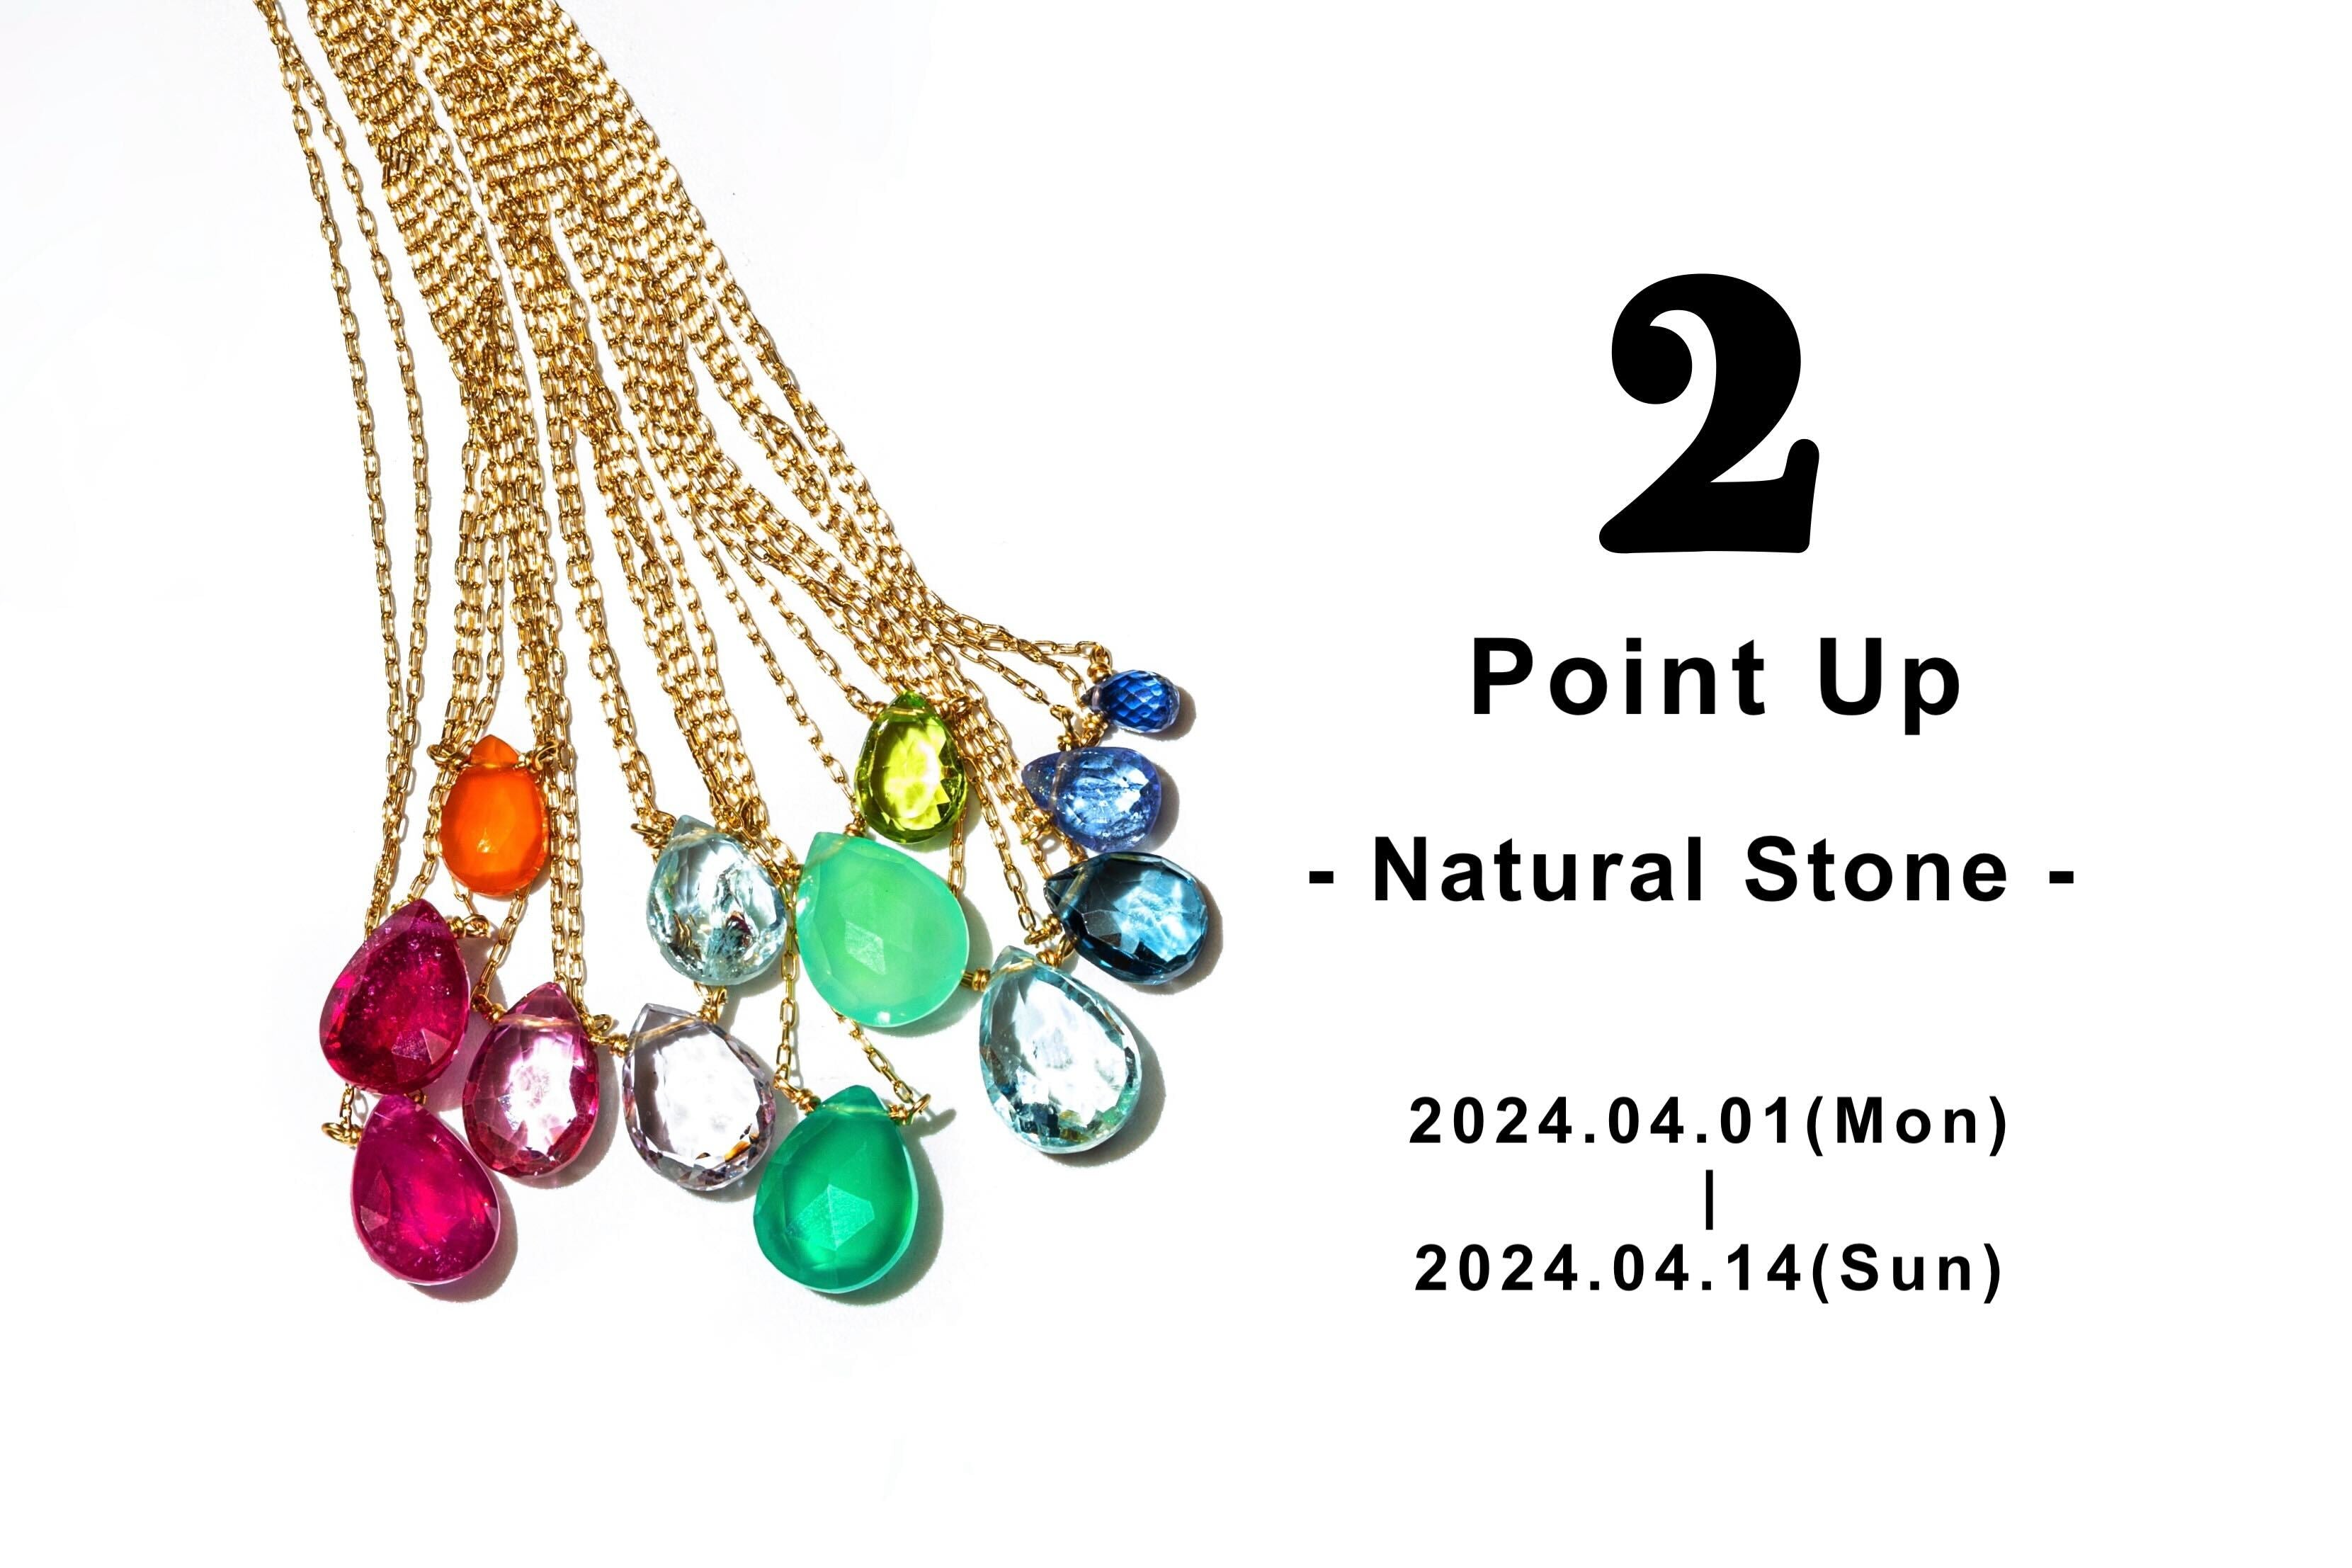 Special  Campaign for Natural Stone